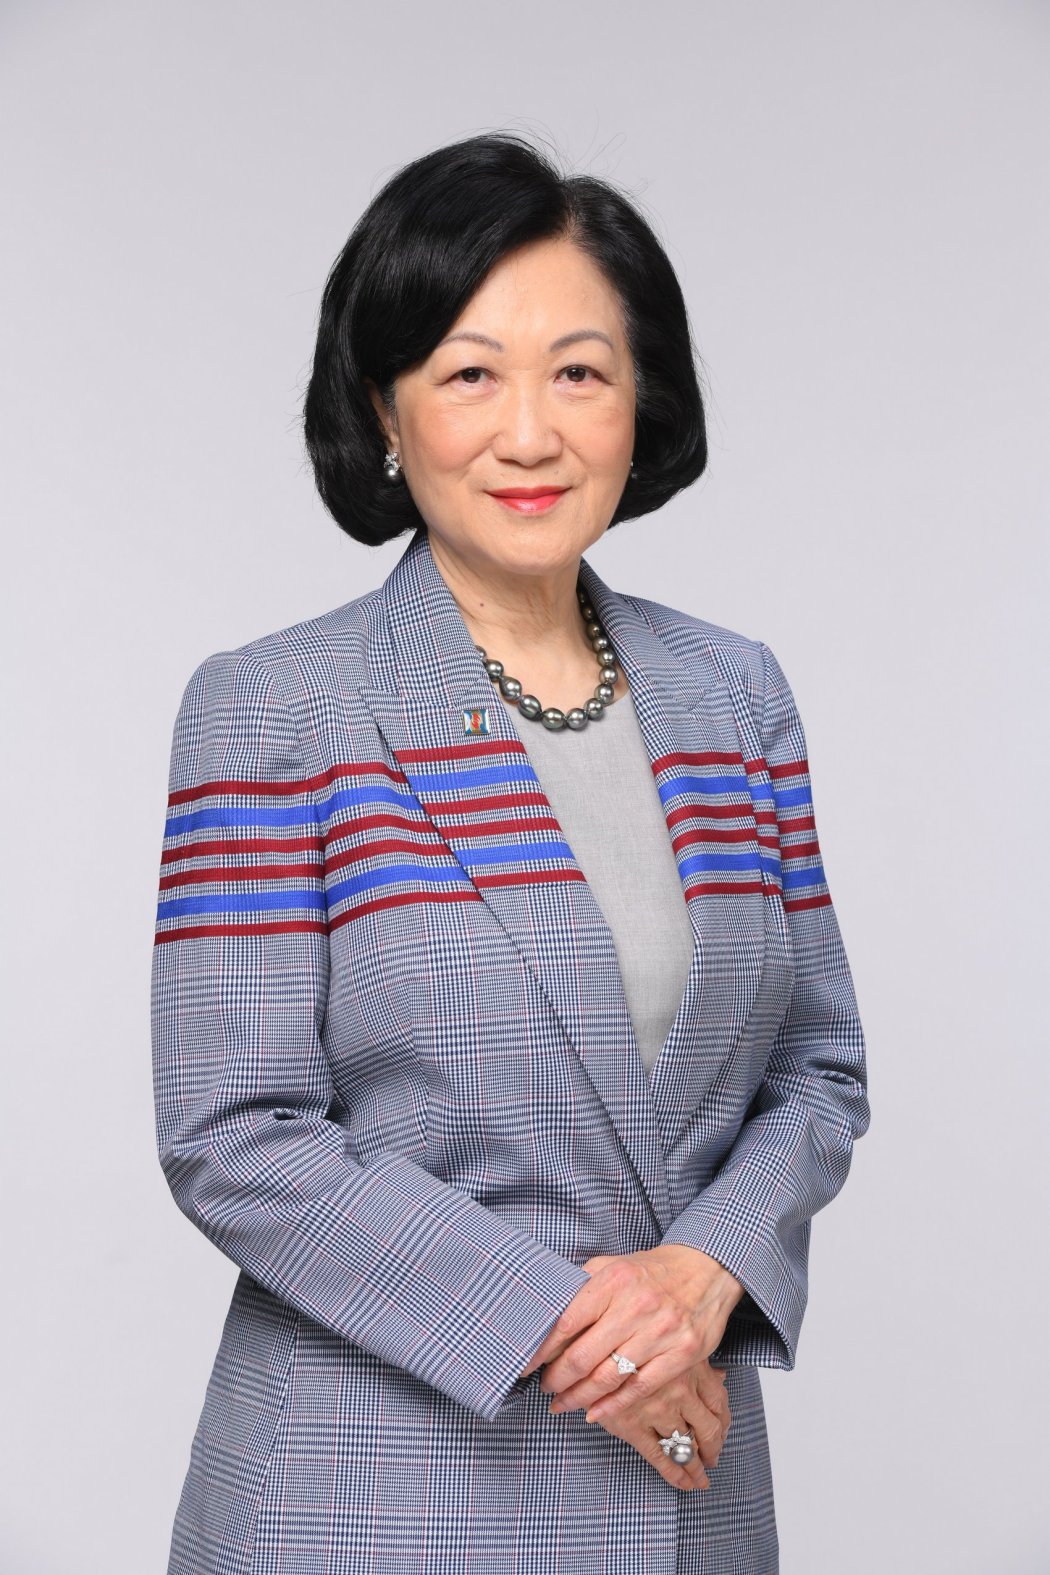 Executive Council convenor and chair of the New People's Party Regina Ip. Photo: Supplied. 